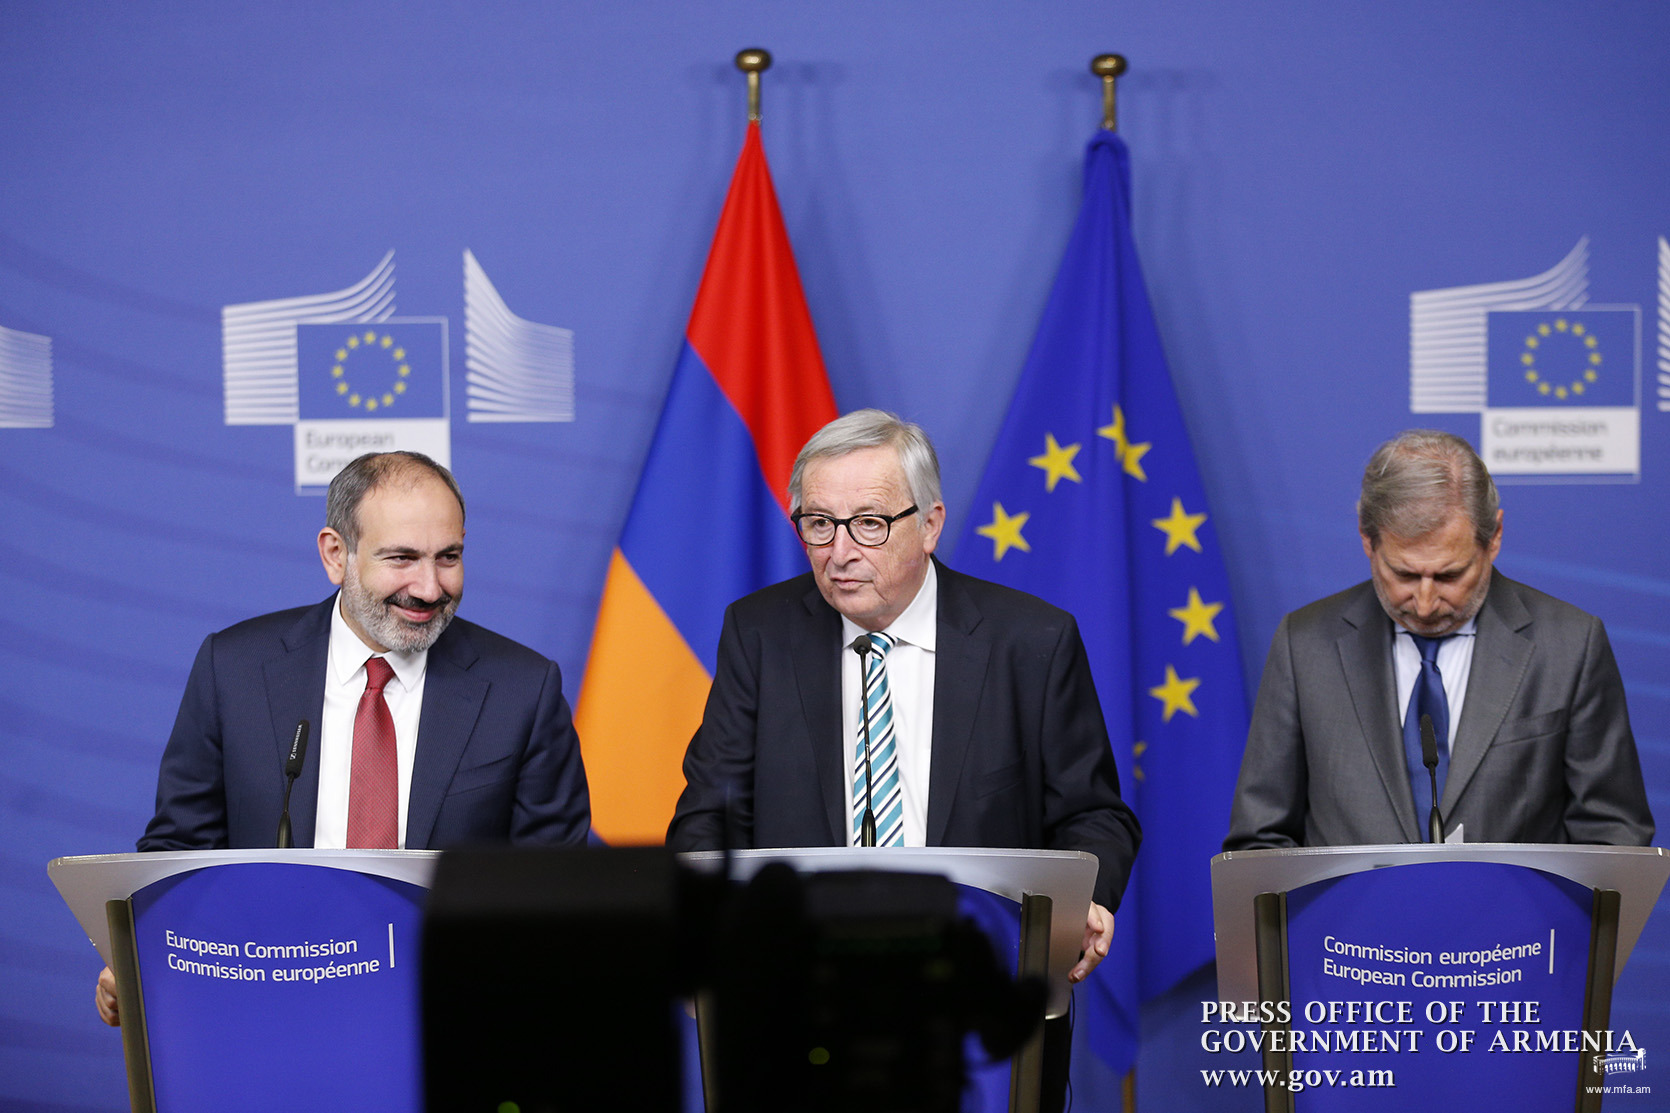 Nikol Pashinyan and Jean-Claude Juncker made statements; Armenian Prime Minister and Johannes Hahn answered journalists' questions